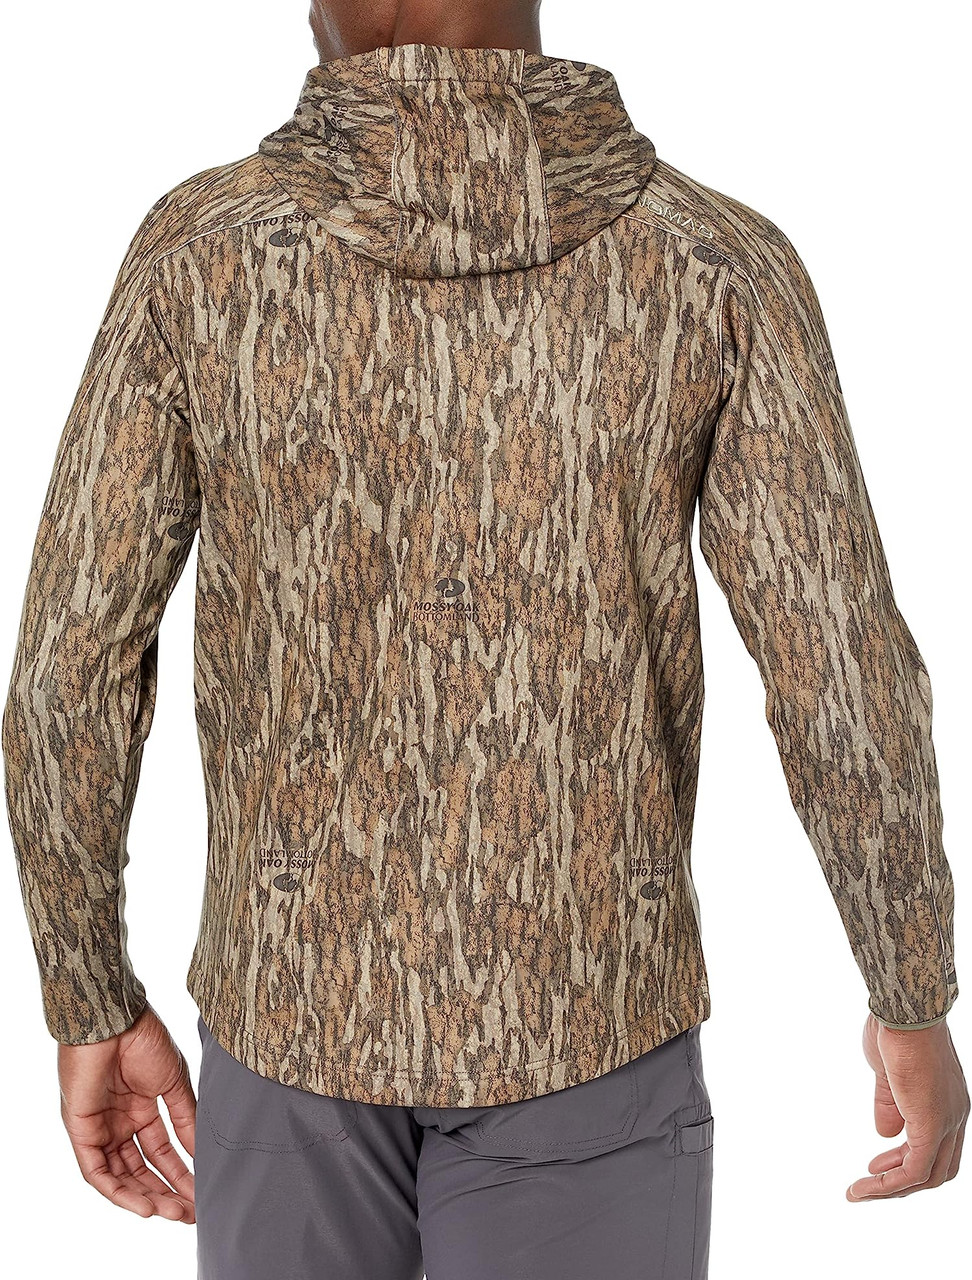 Nomad WPF Hoodie Mid-Weight Water Resistant Hunting Fleece-Bottomaland -2XL